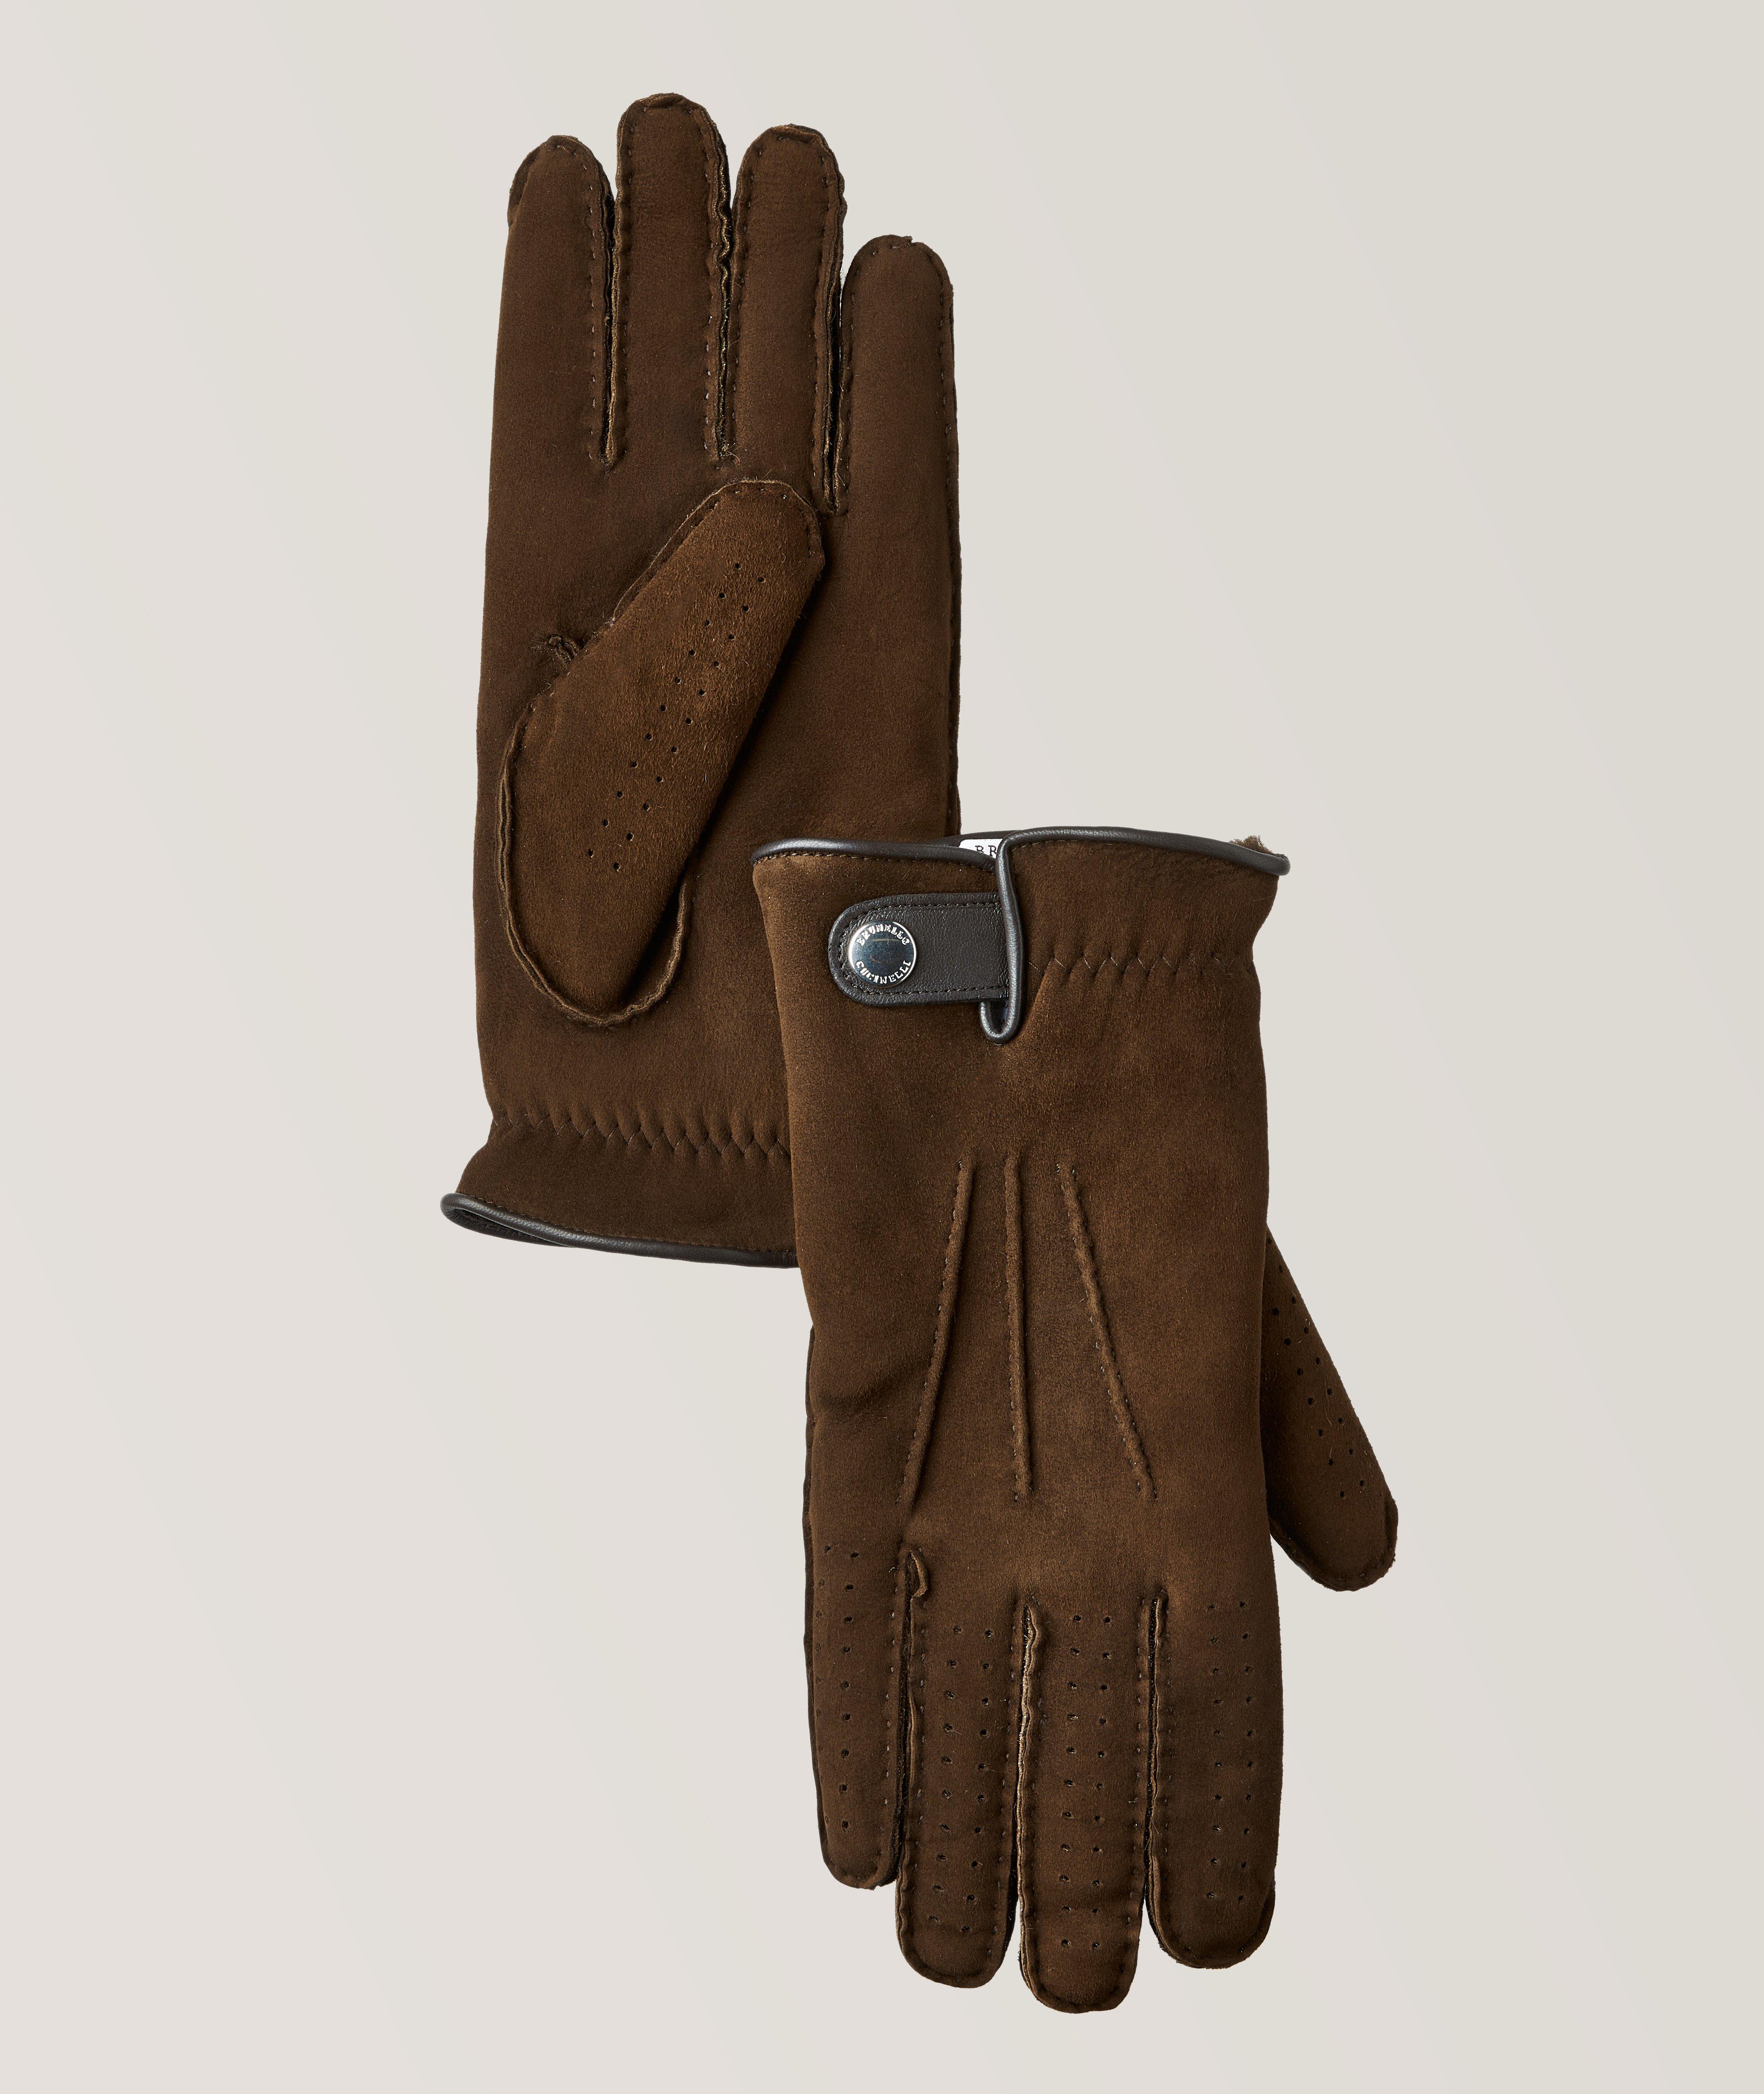 Lamb Leather Lined Gloves image 0